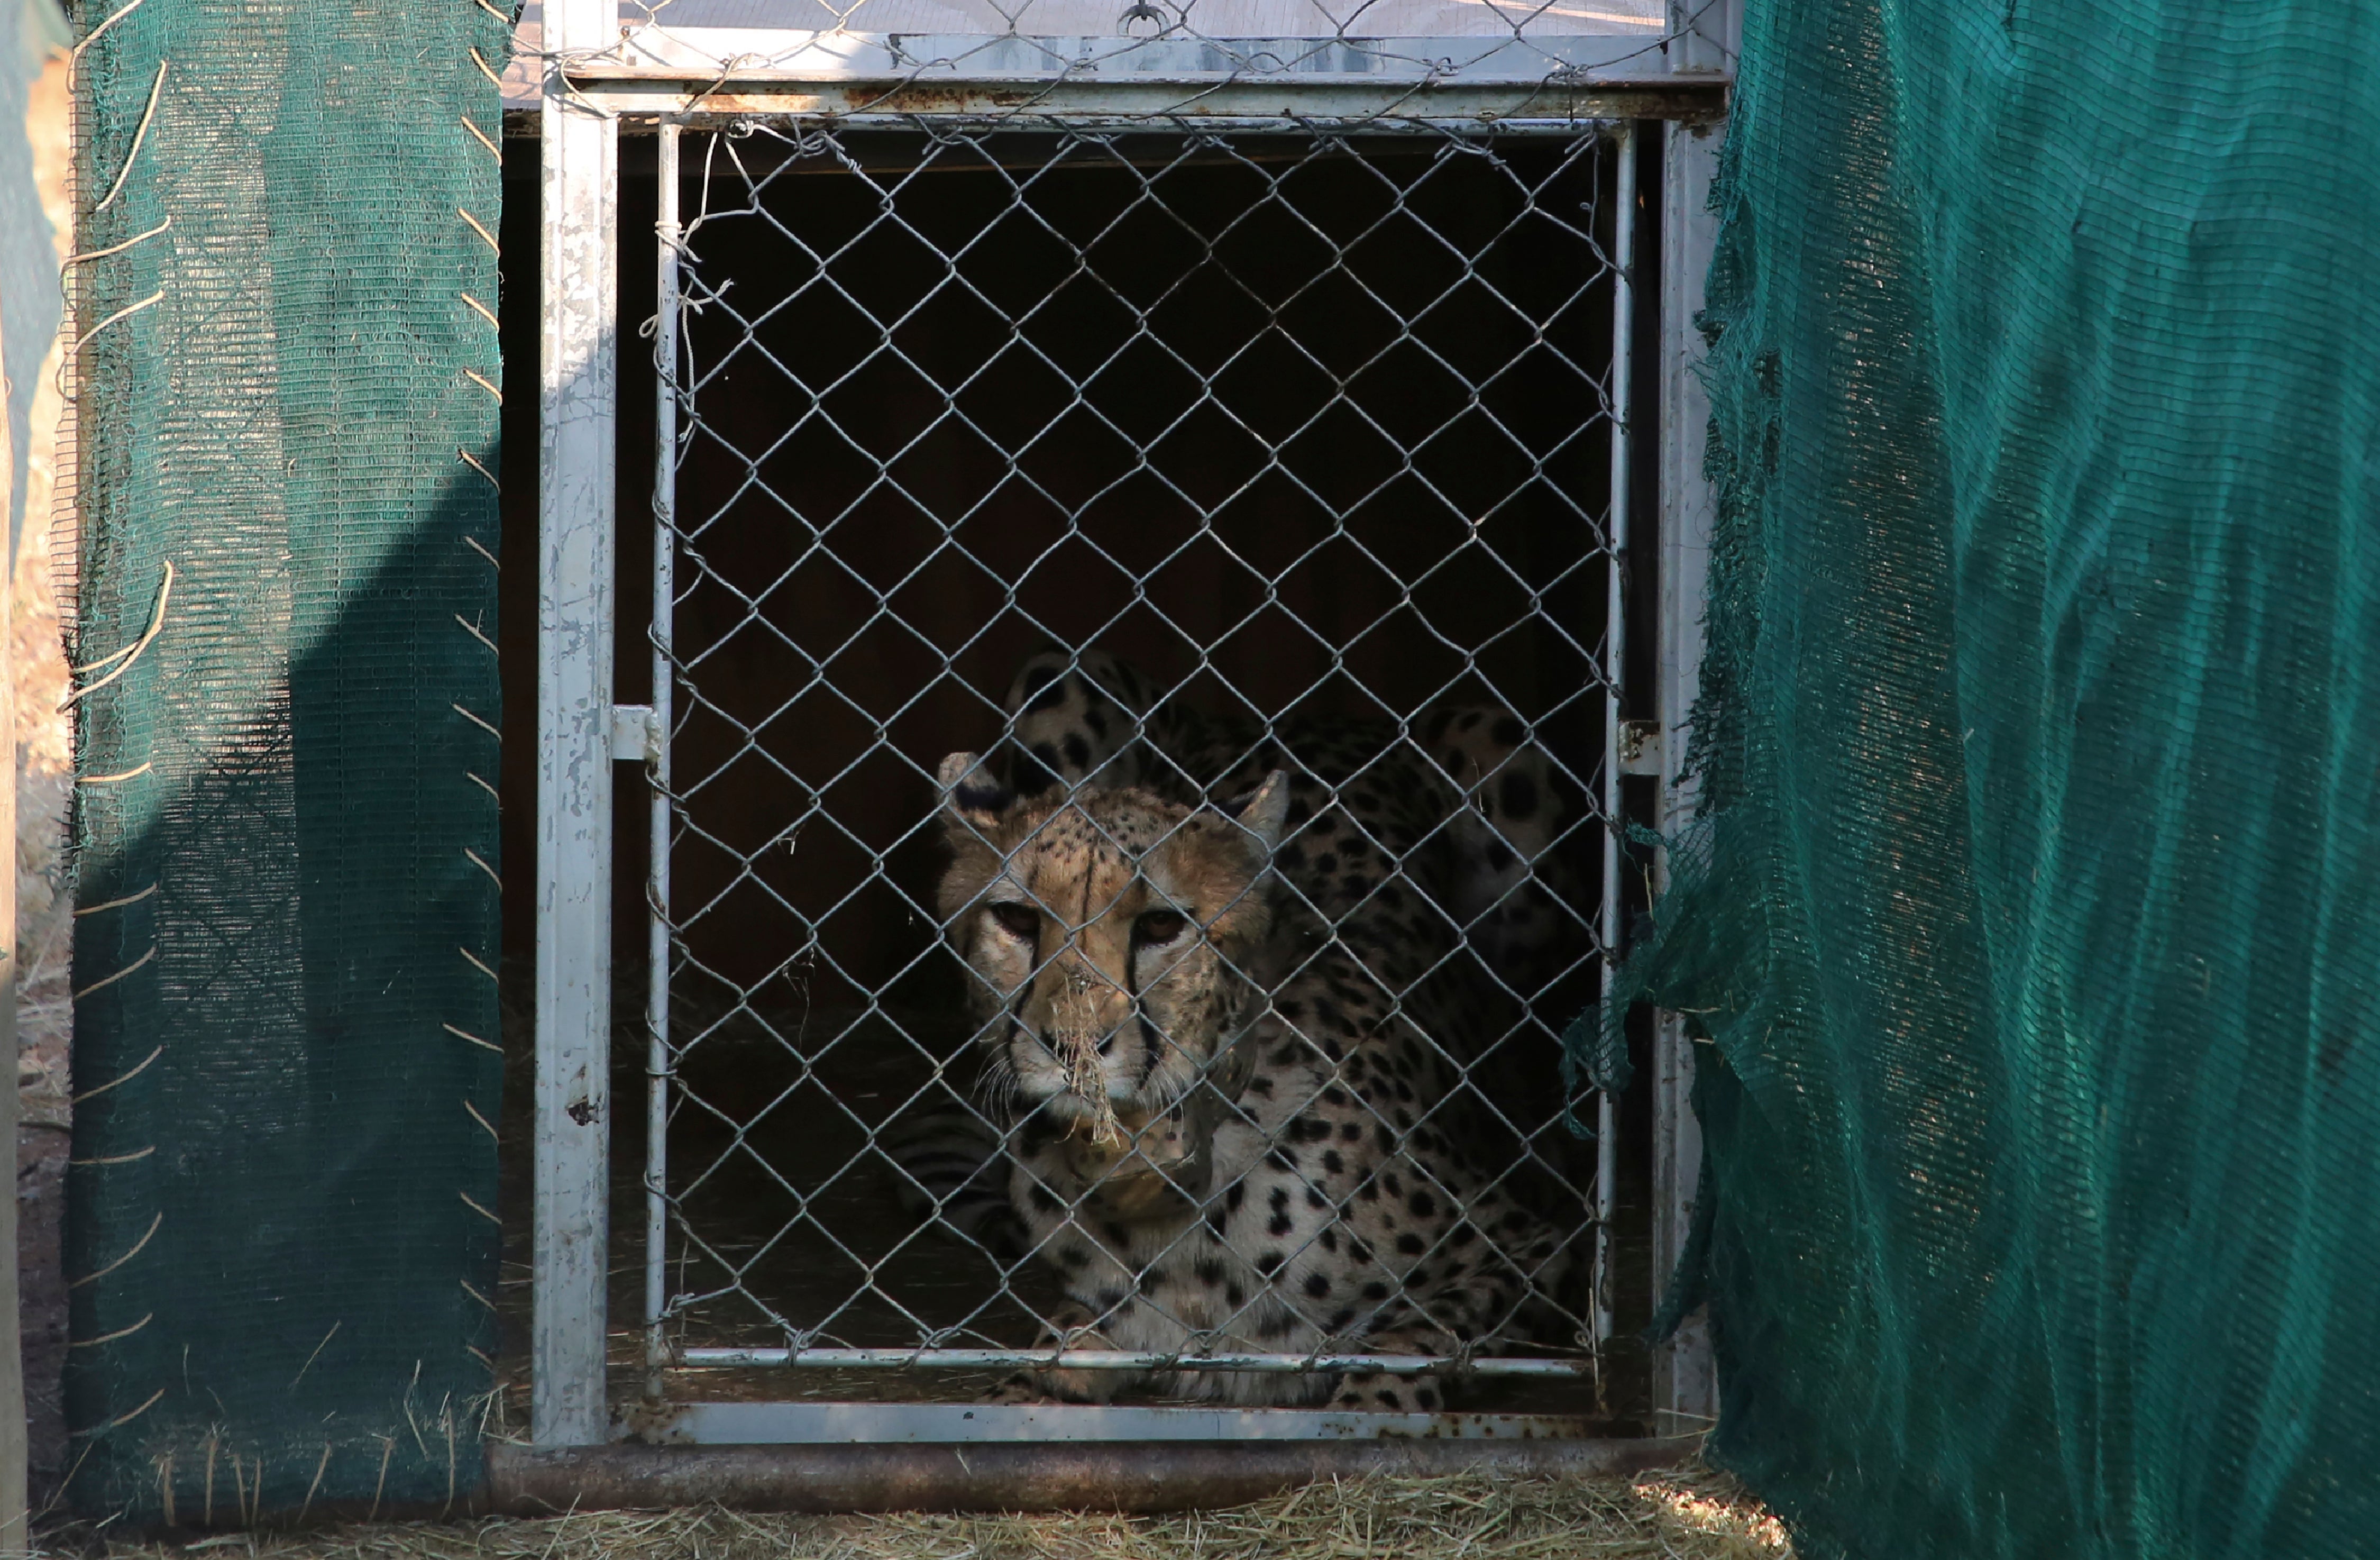 File photo: A cheetah lies inside a transport cage at the Cheetah Conservation Fund before being relocated to India